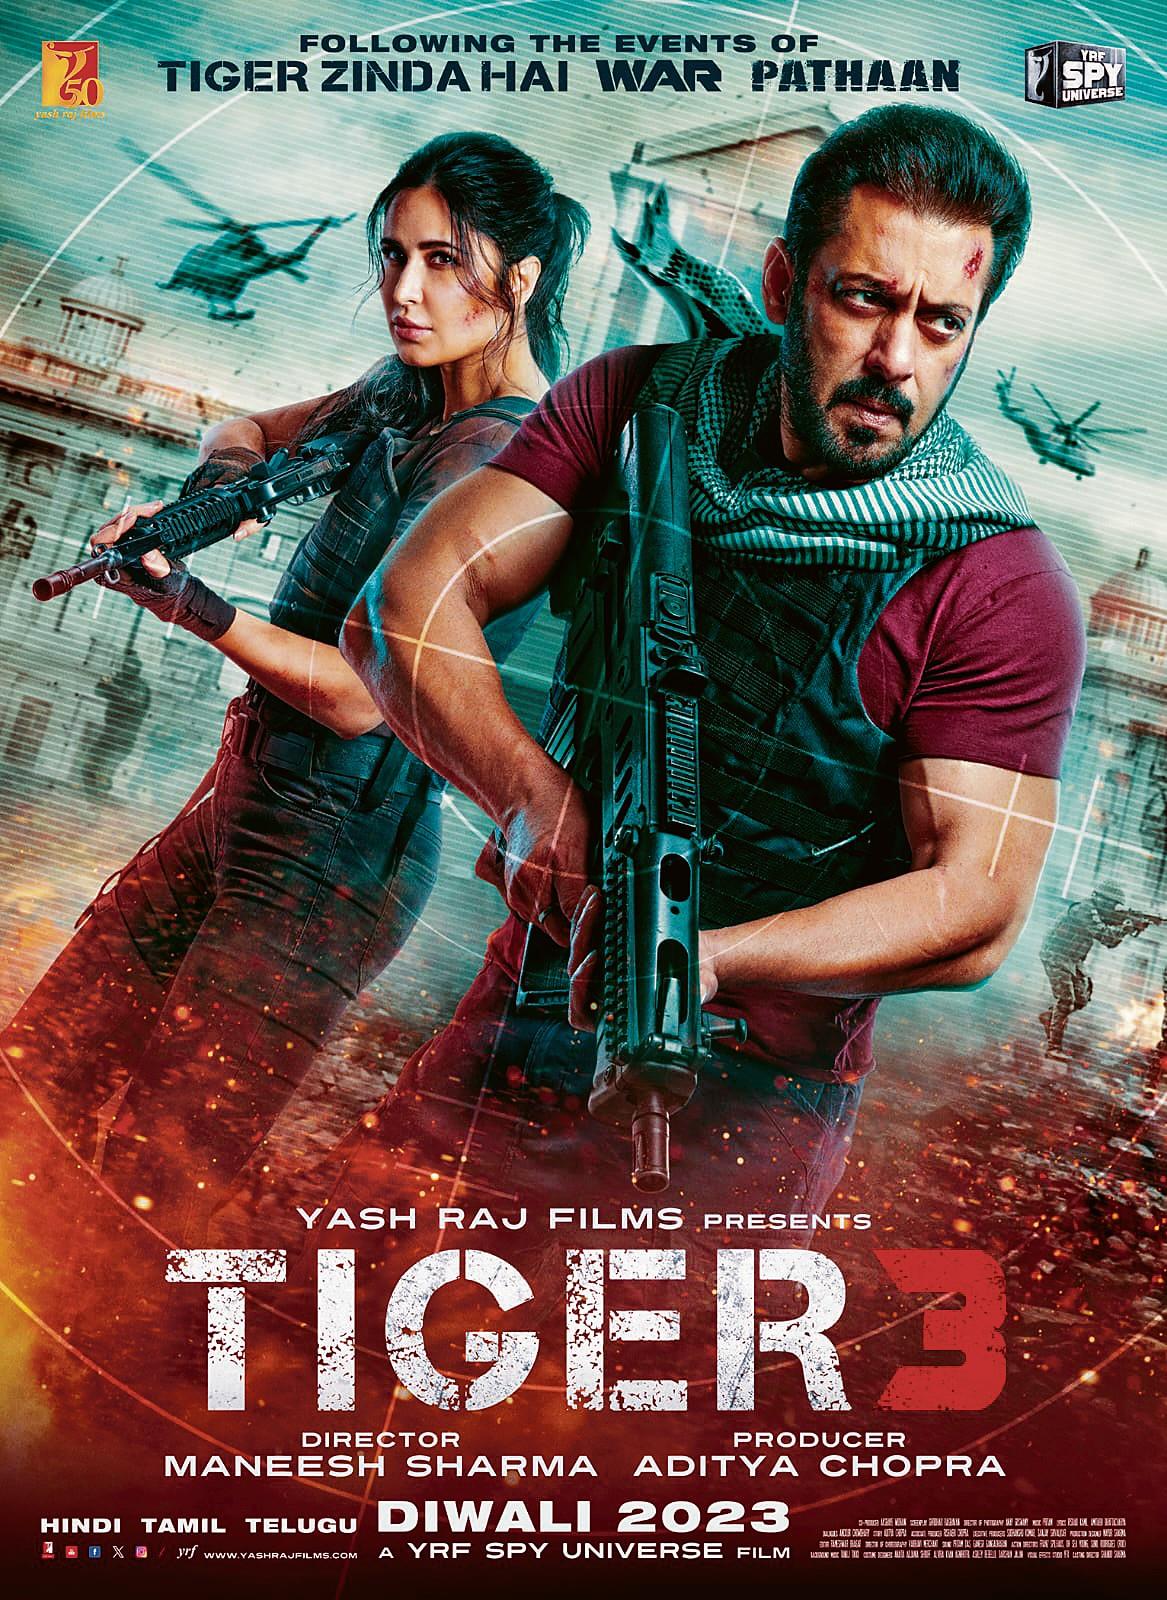 Tiger 3 poster out The Tribune India